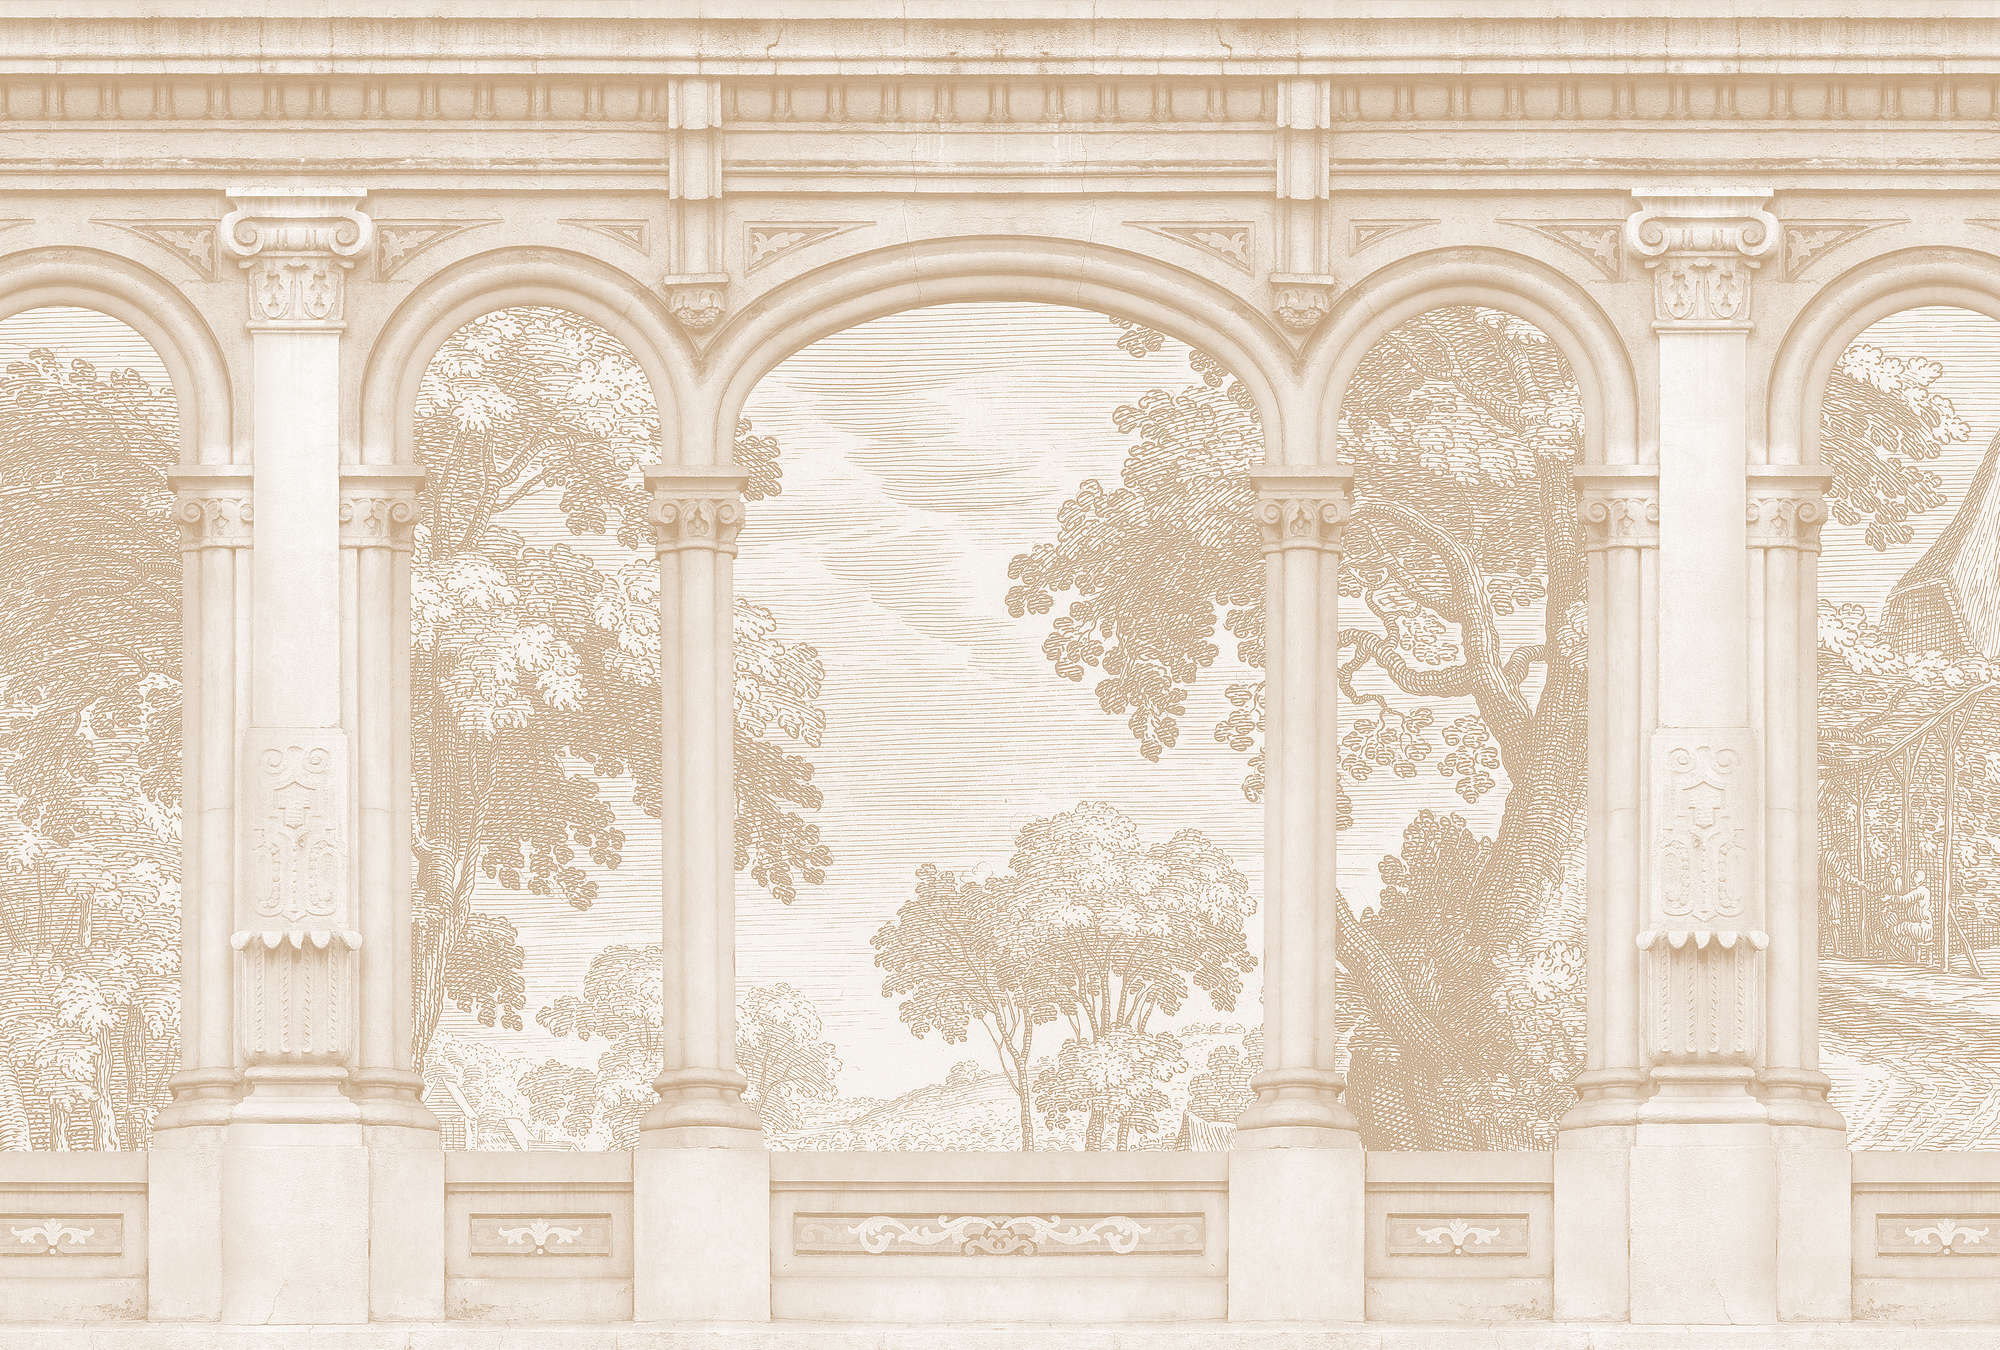             Roma 2 - Beige wall mural Historic Design with round arch window
        